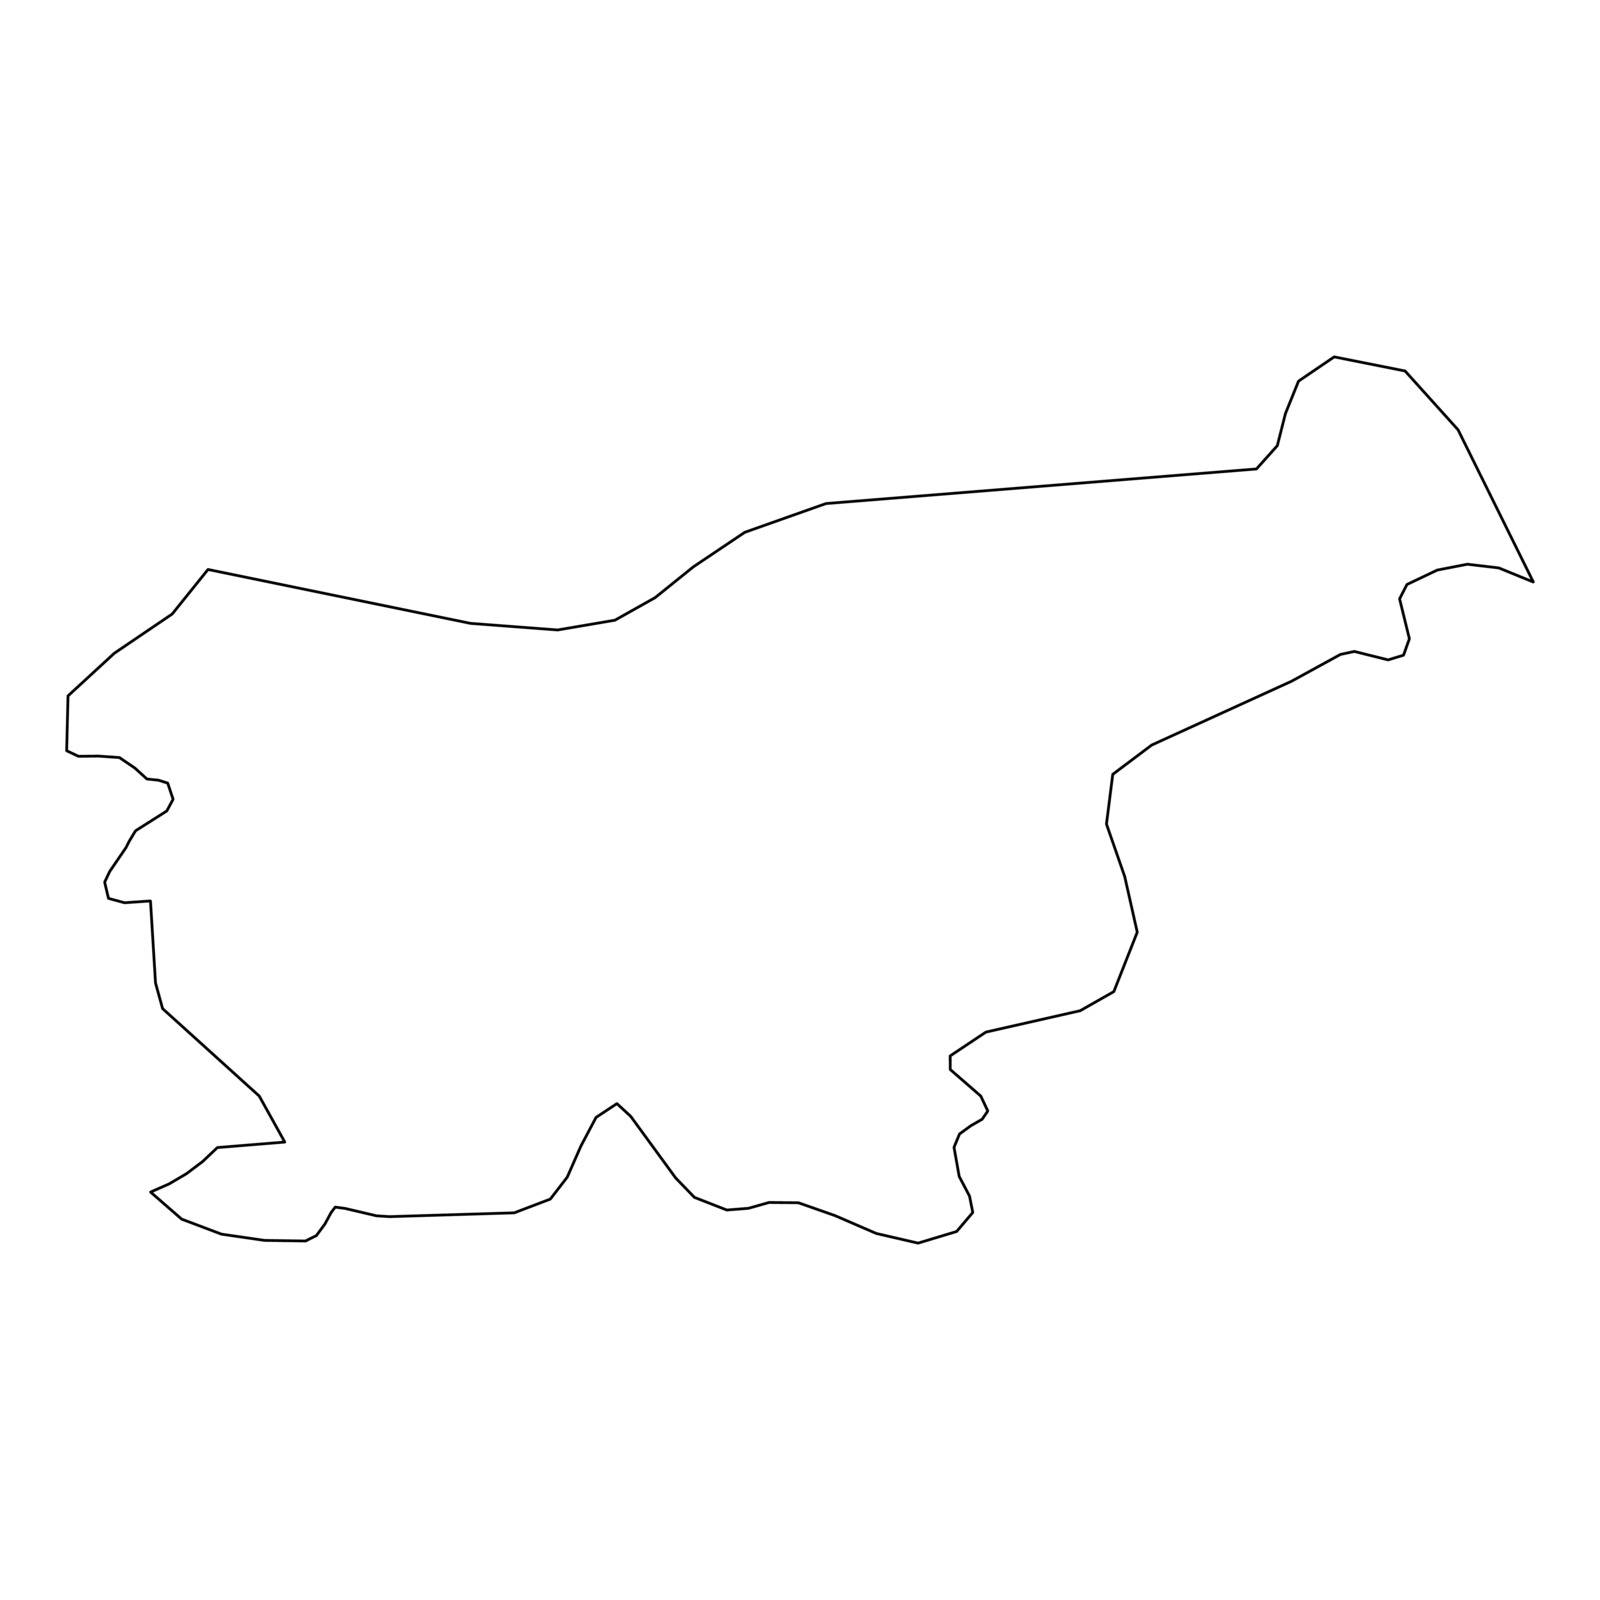 Slovenia - solid black outline border map of country area. Simple flat vector illustration by pyty